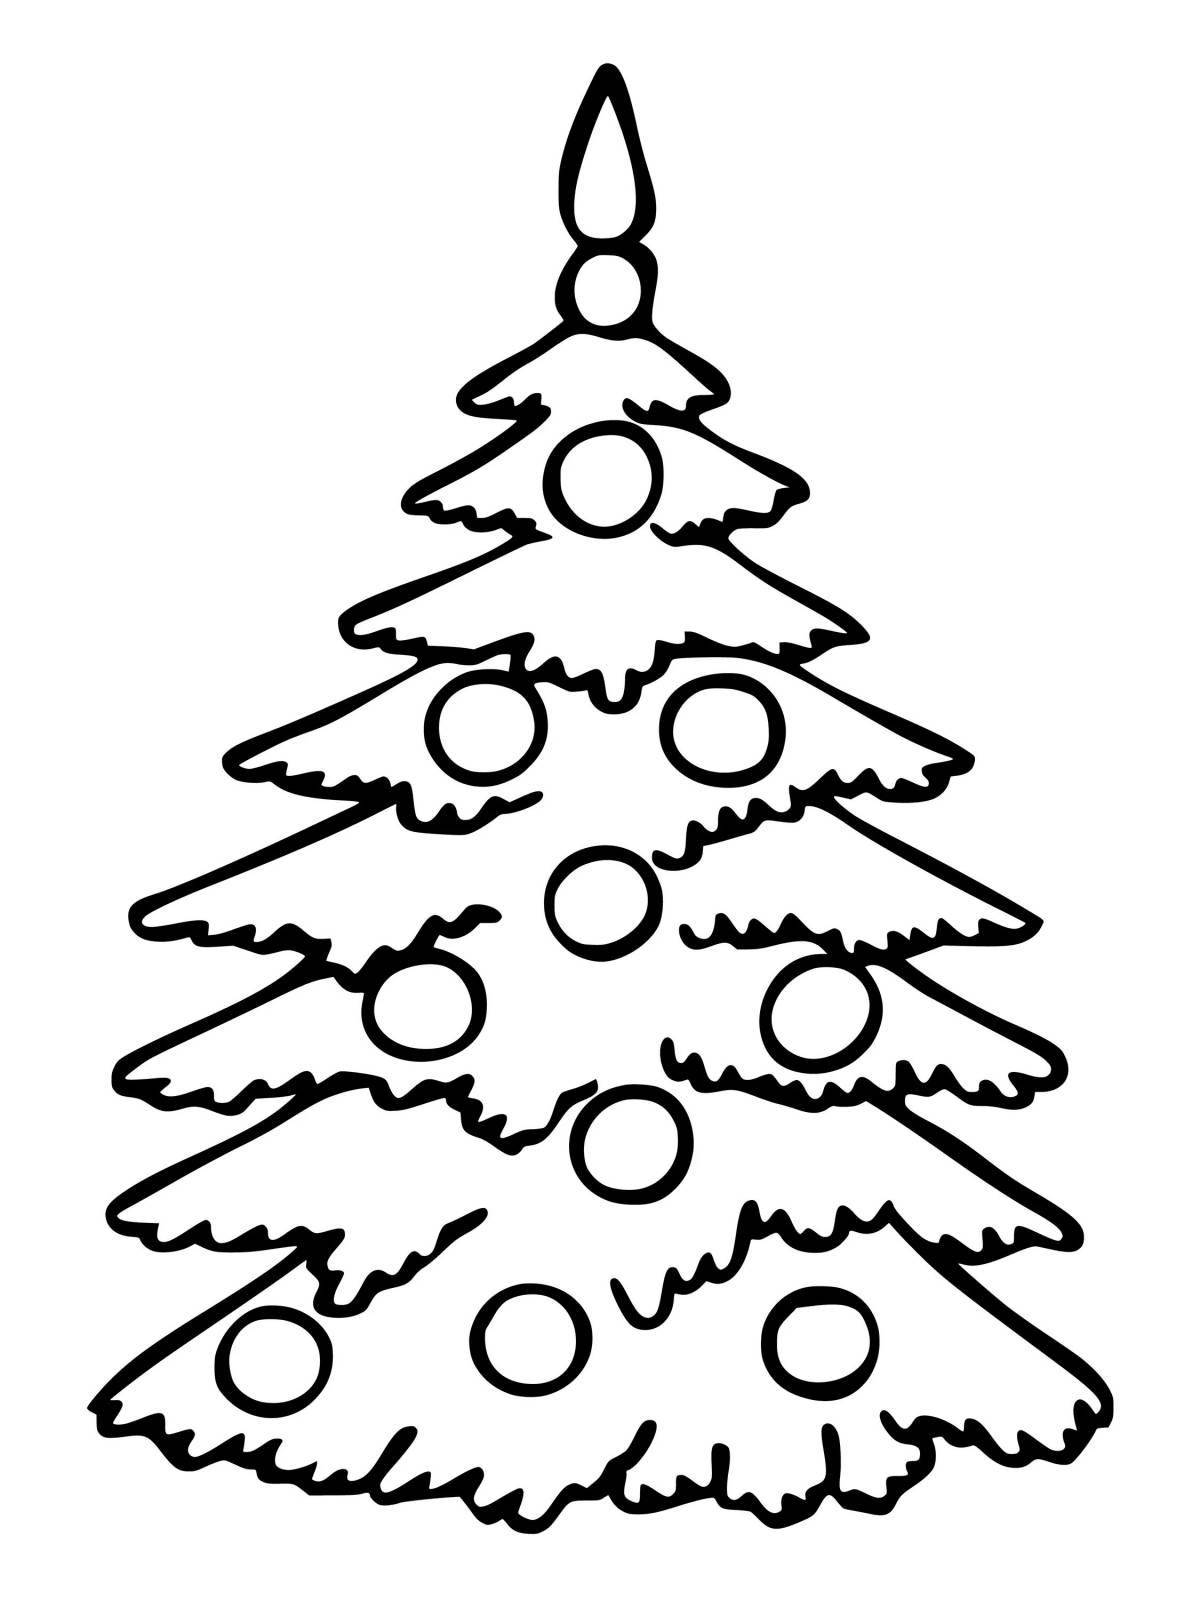 Merry Christmas tree coloring page